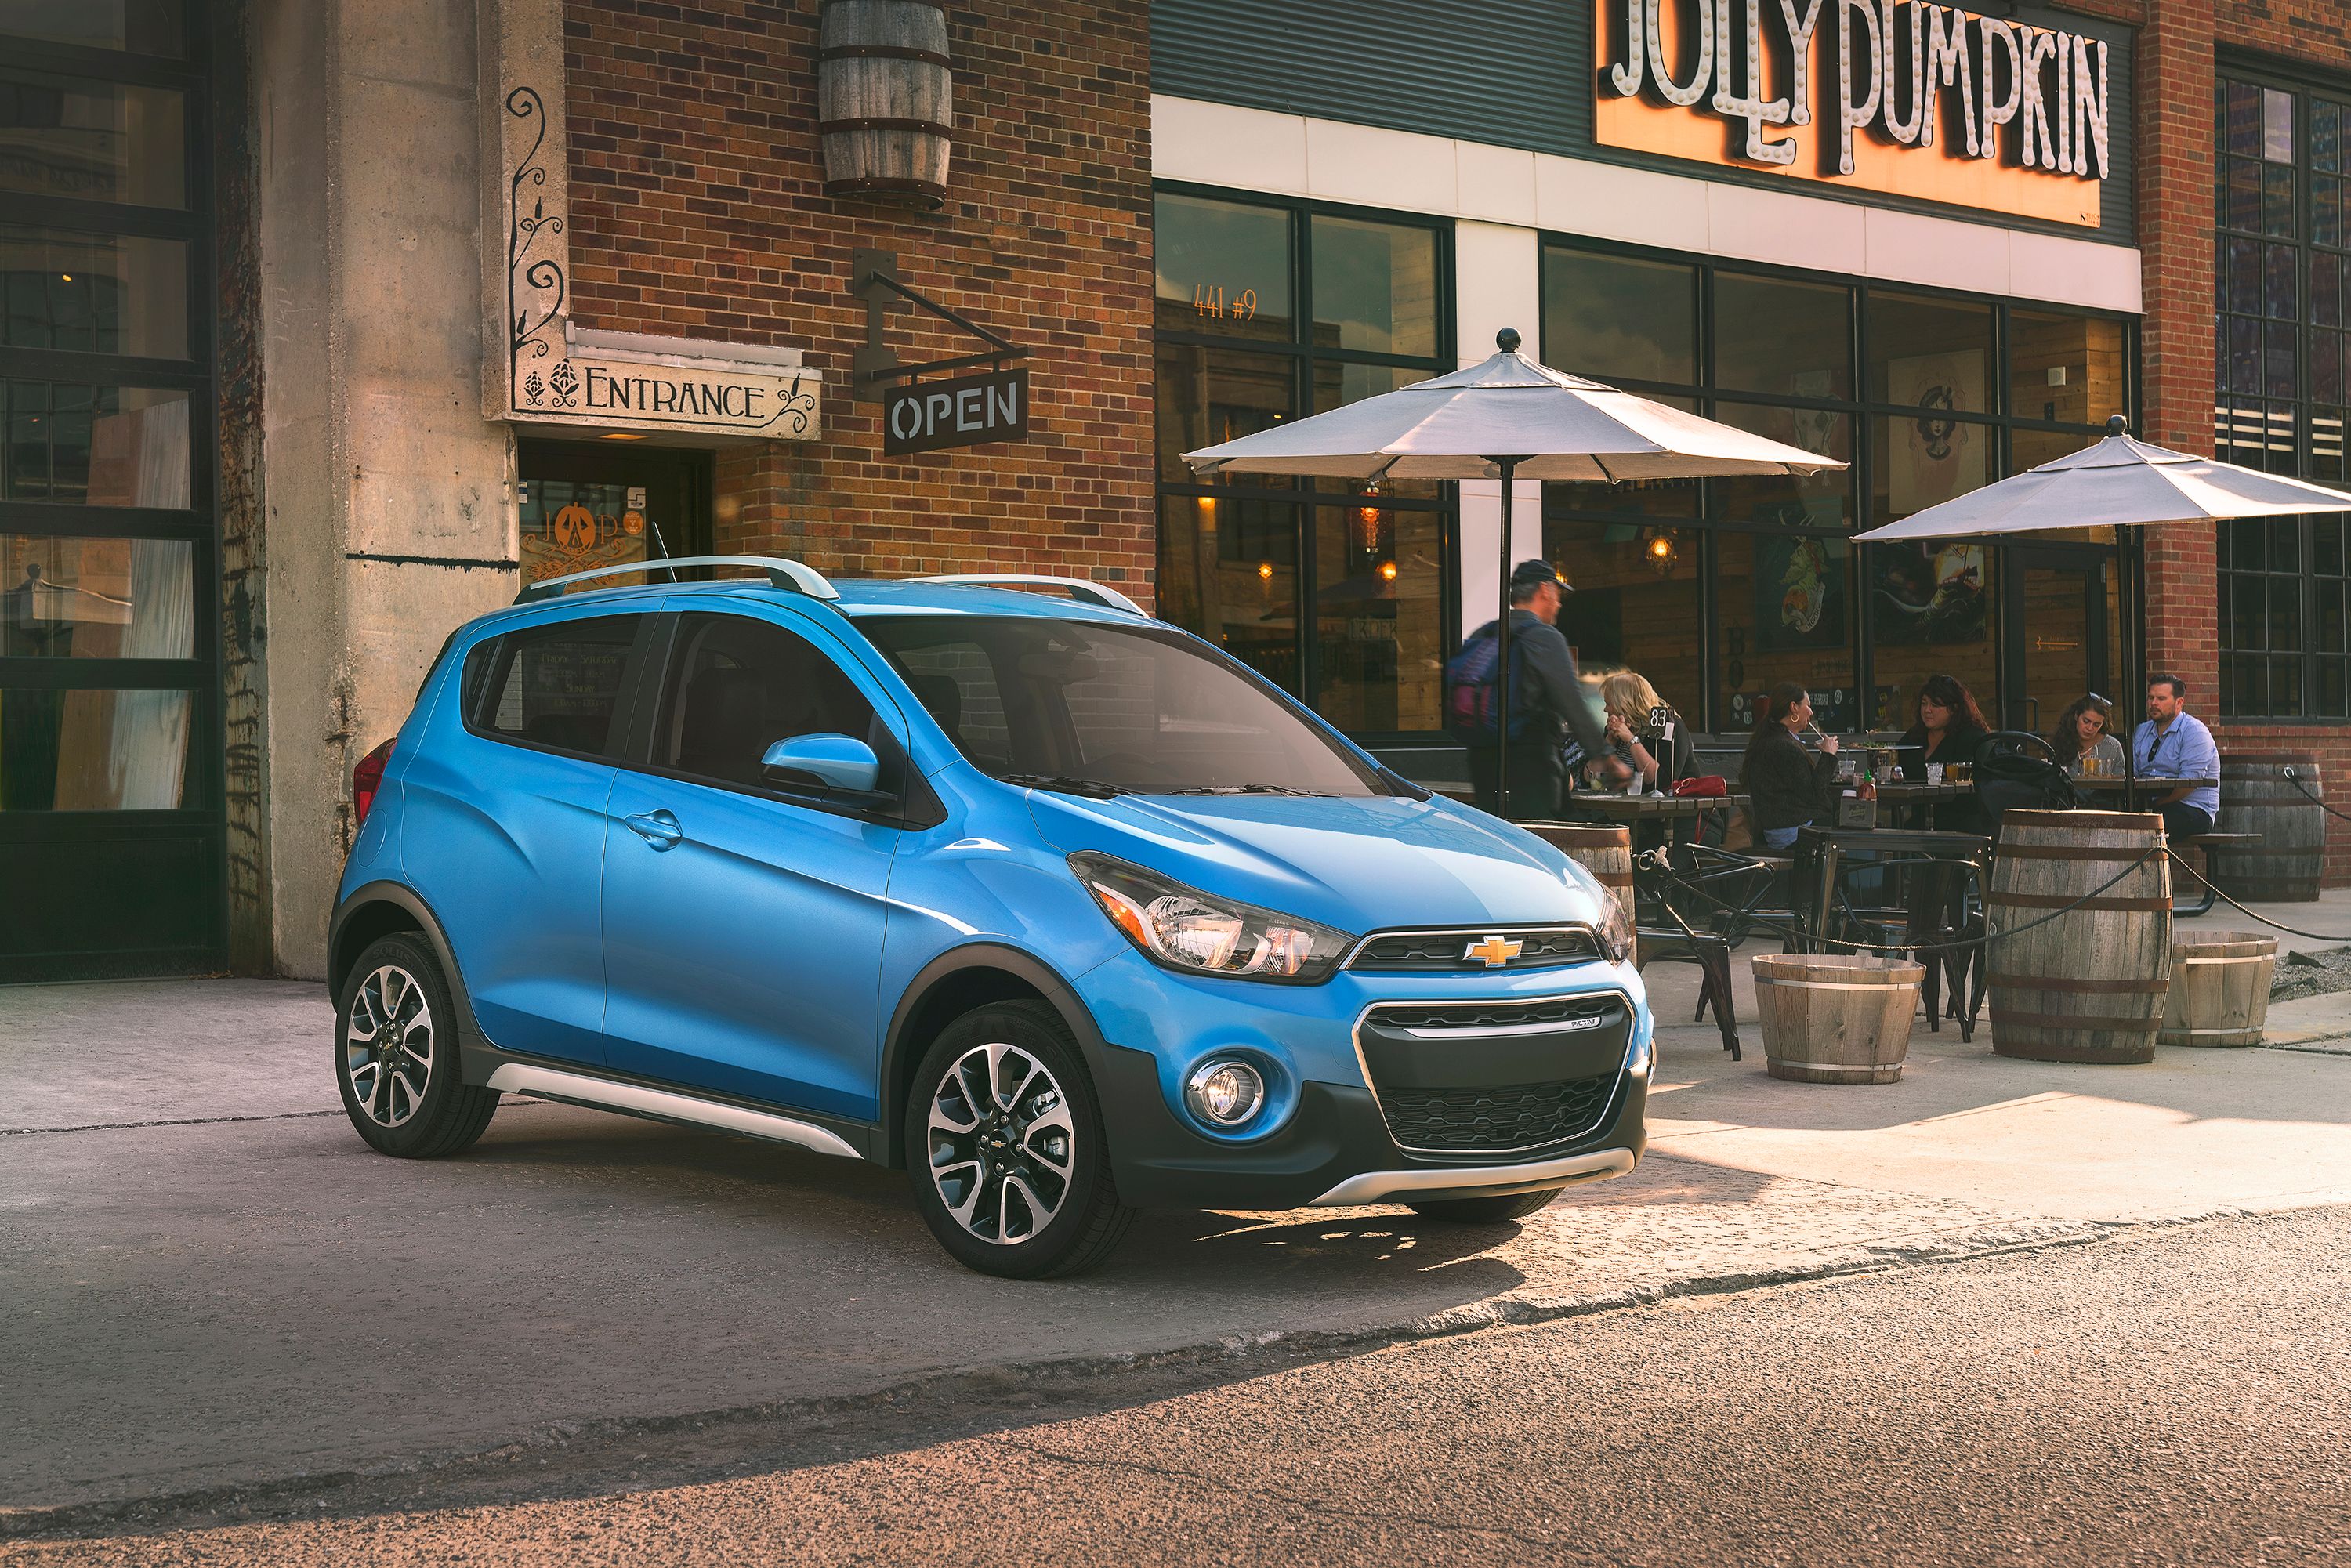 Blue Chevy Spark parked in front of building